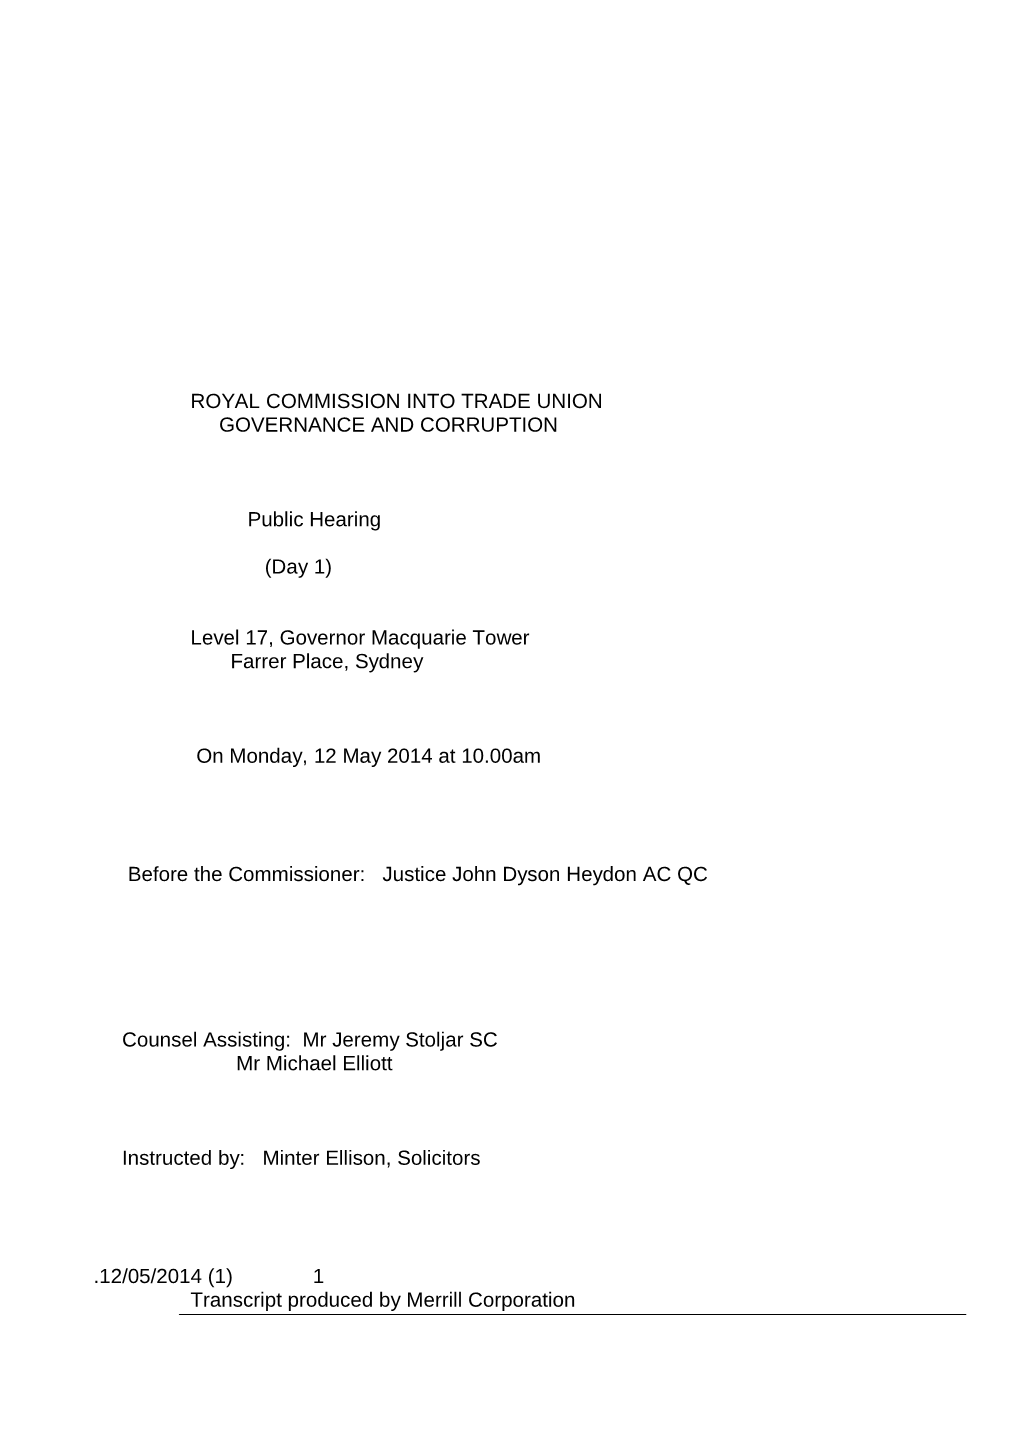 Trade Union Royal Commission Transcript for 12 May 2014